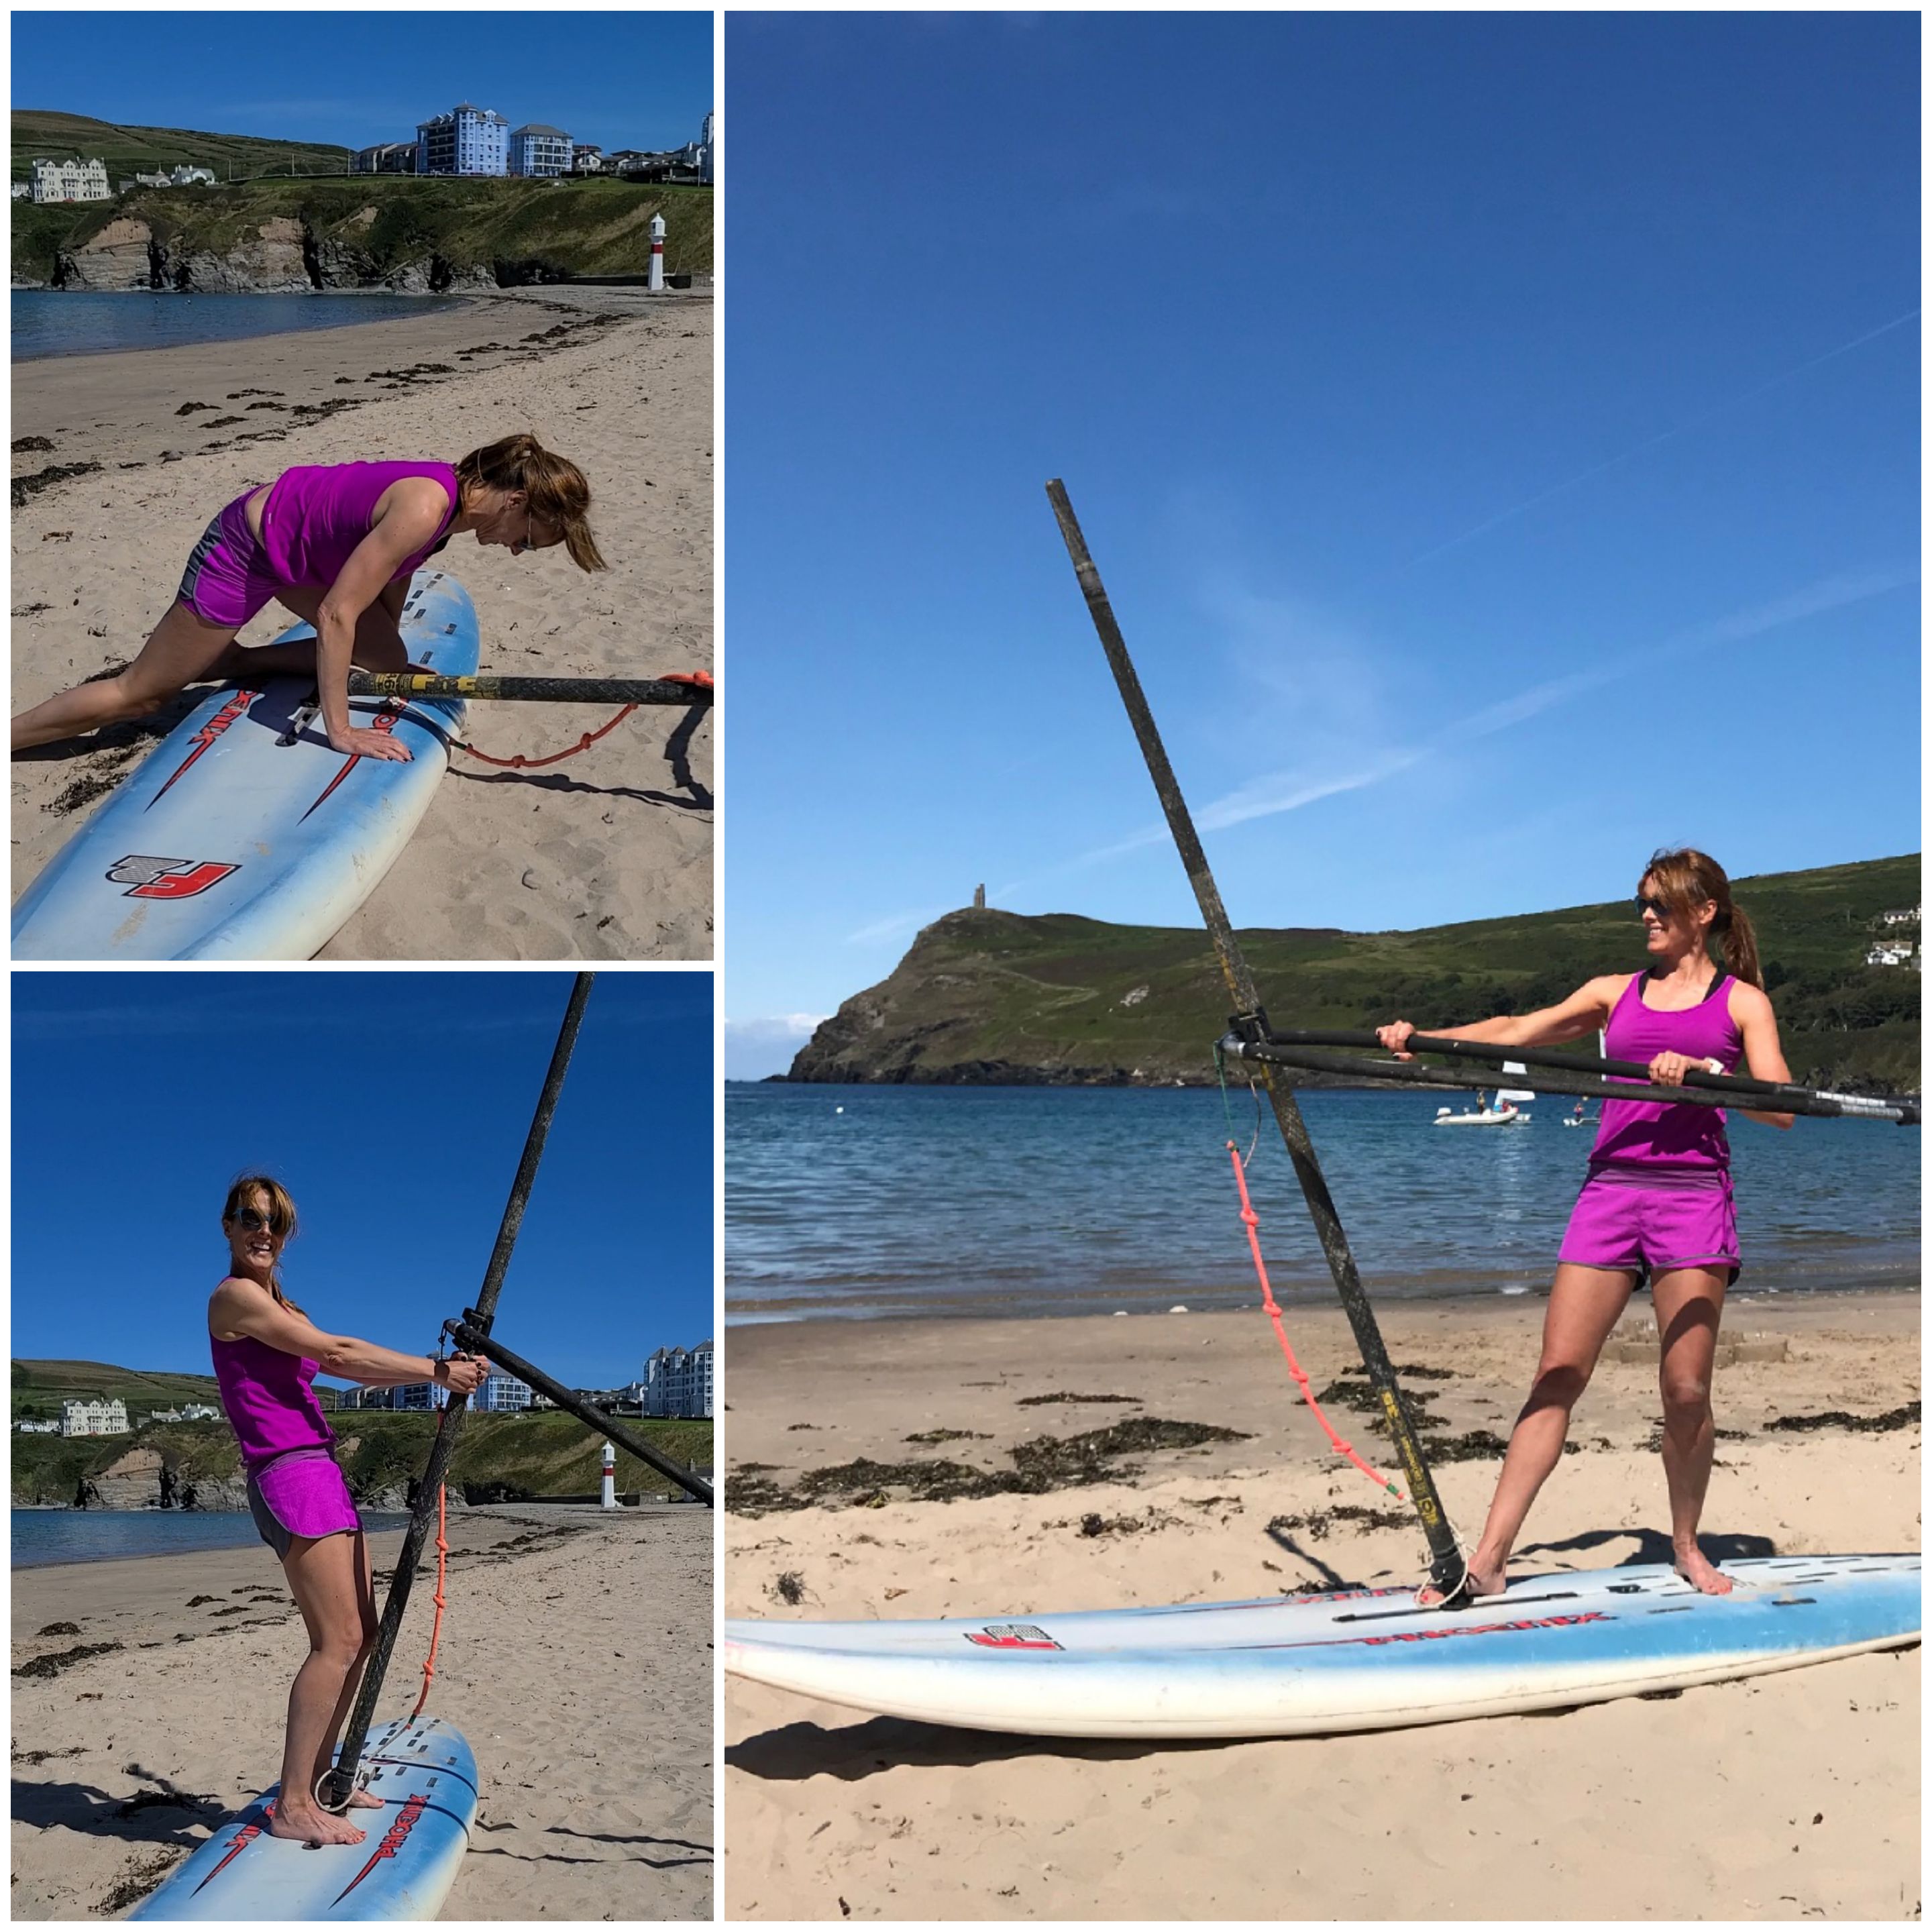 Learning to windsurf in Port Erin